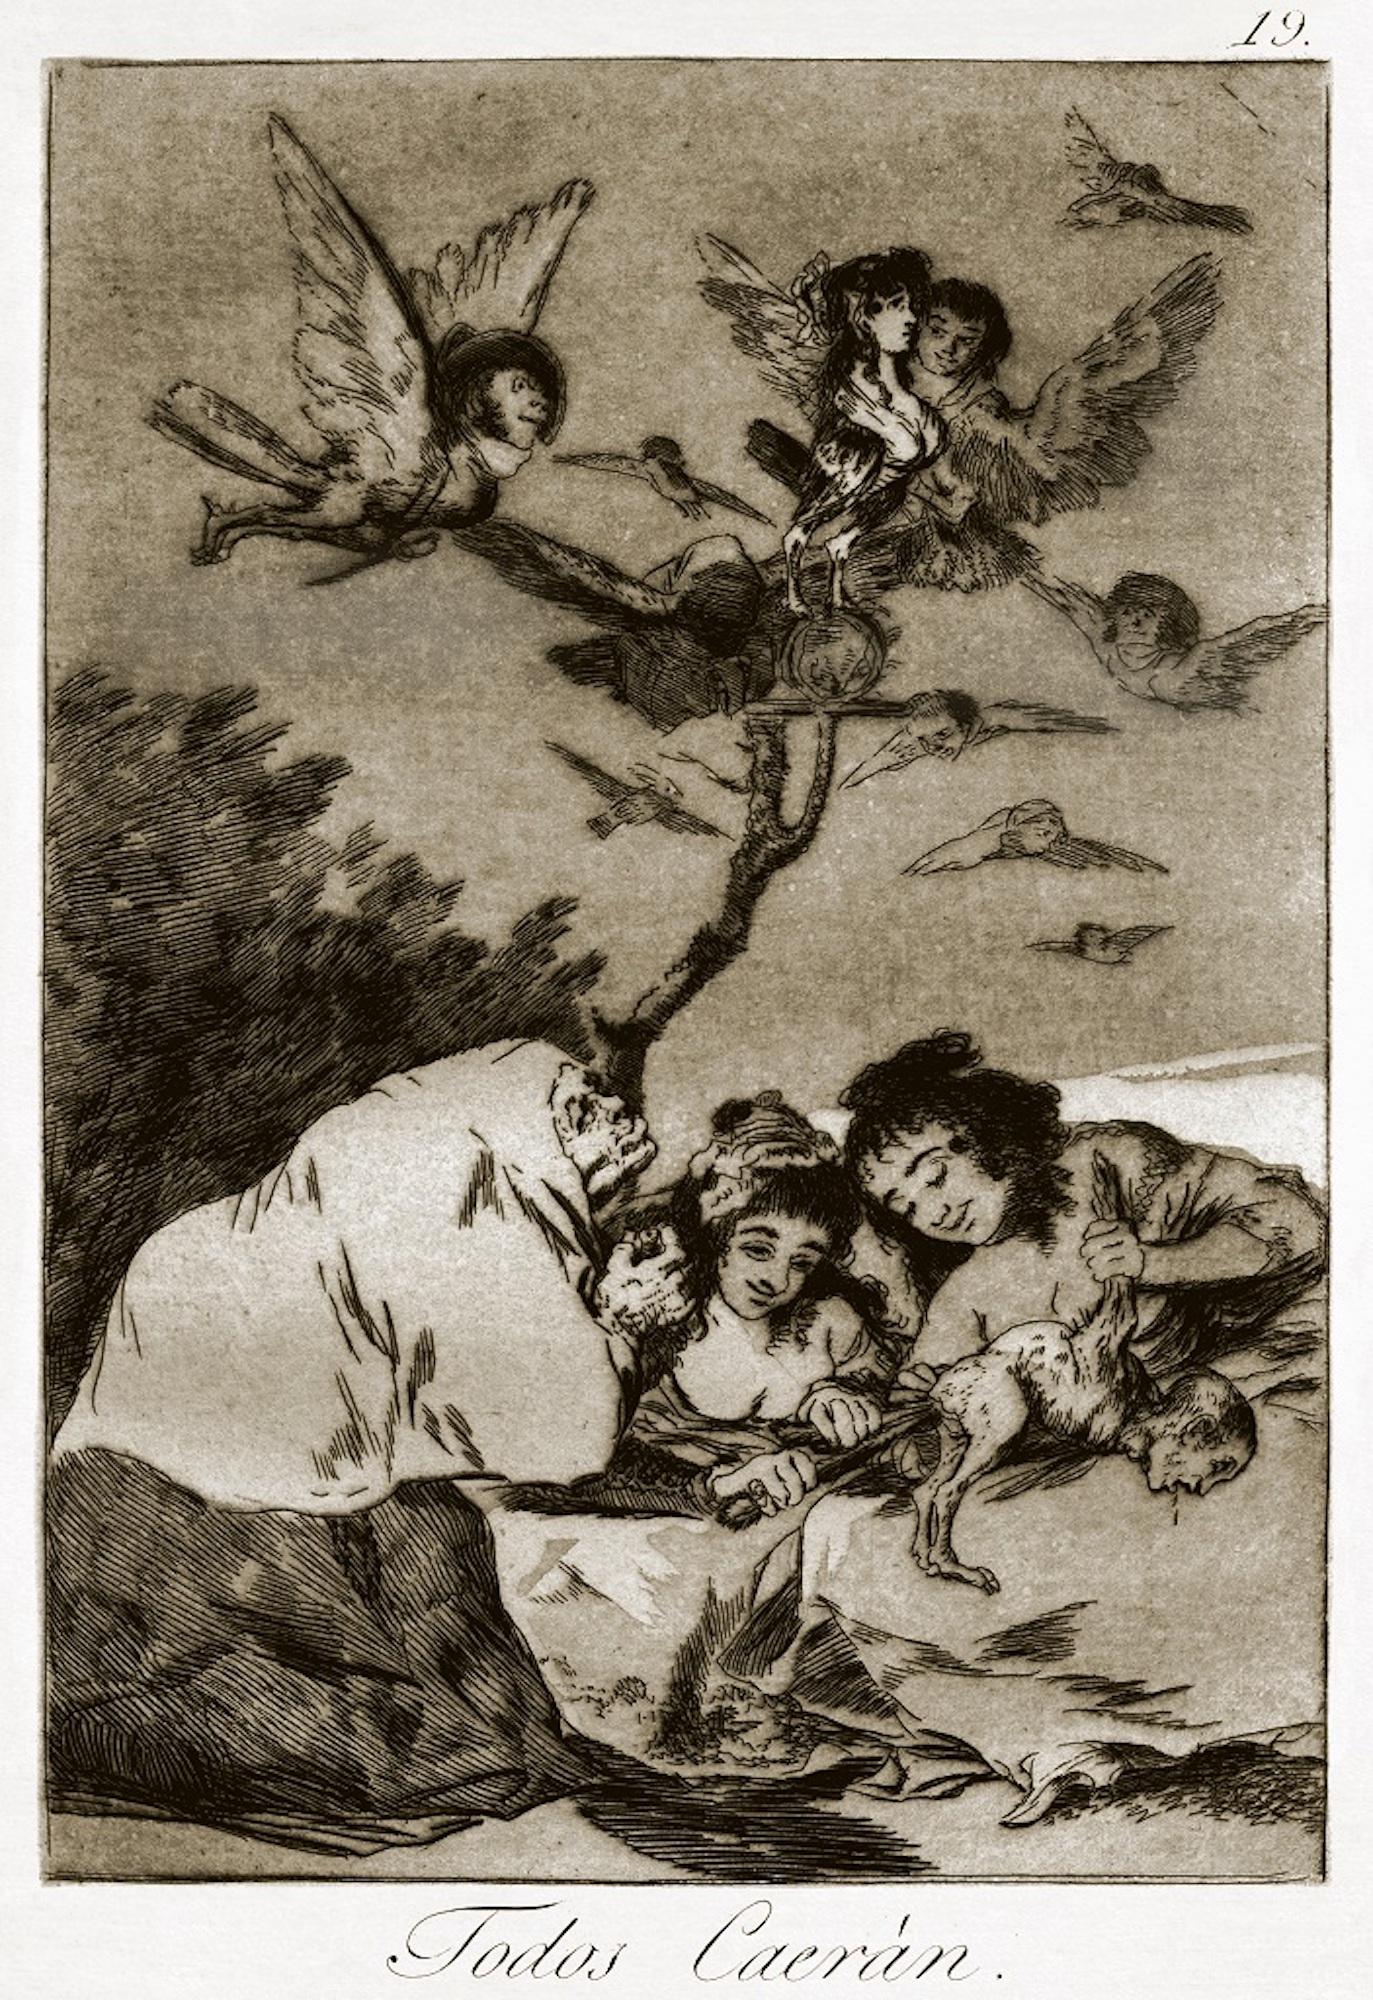 Todos Caeran is an original artwork realized by the artist Francisco Goya and published in 1799 for the first time.

Original Etching on wove paper.

The etching belongs to the Third Edition of "Los Caprichos" a series published in 1868 by the